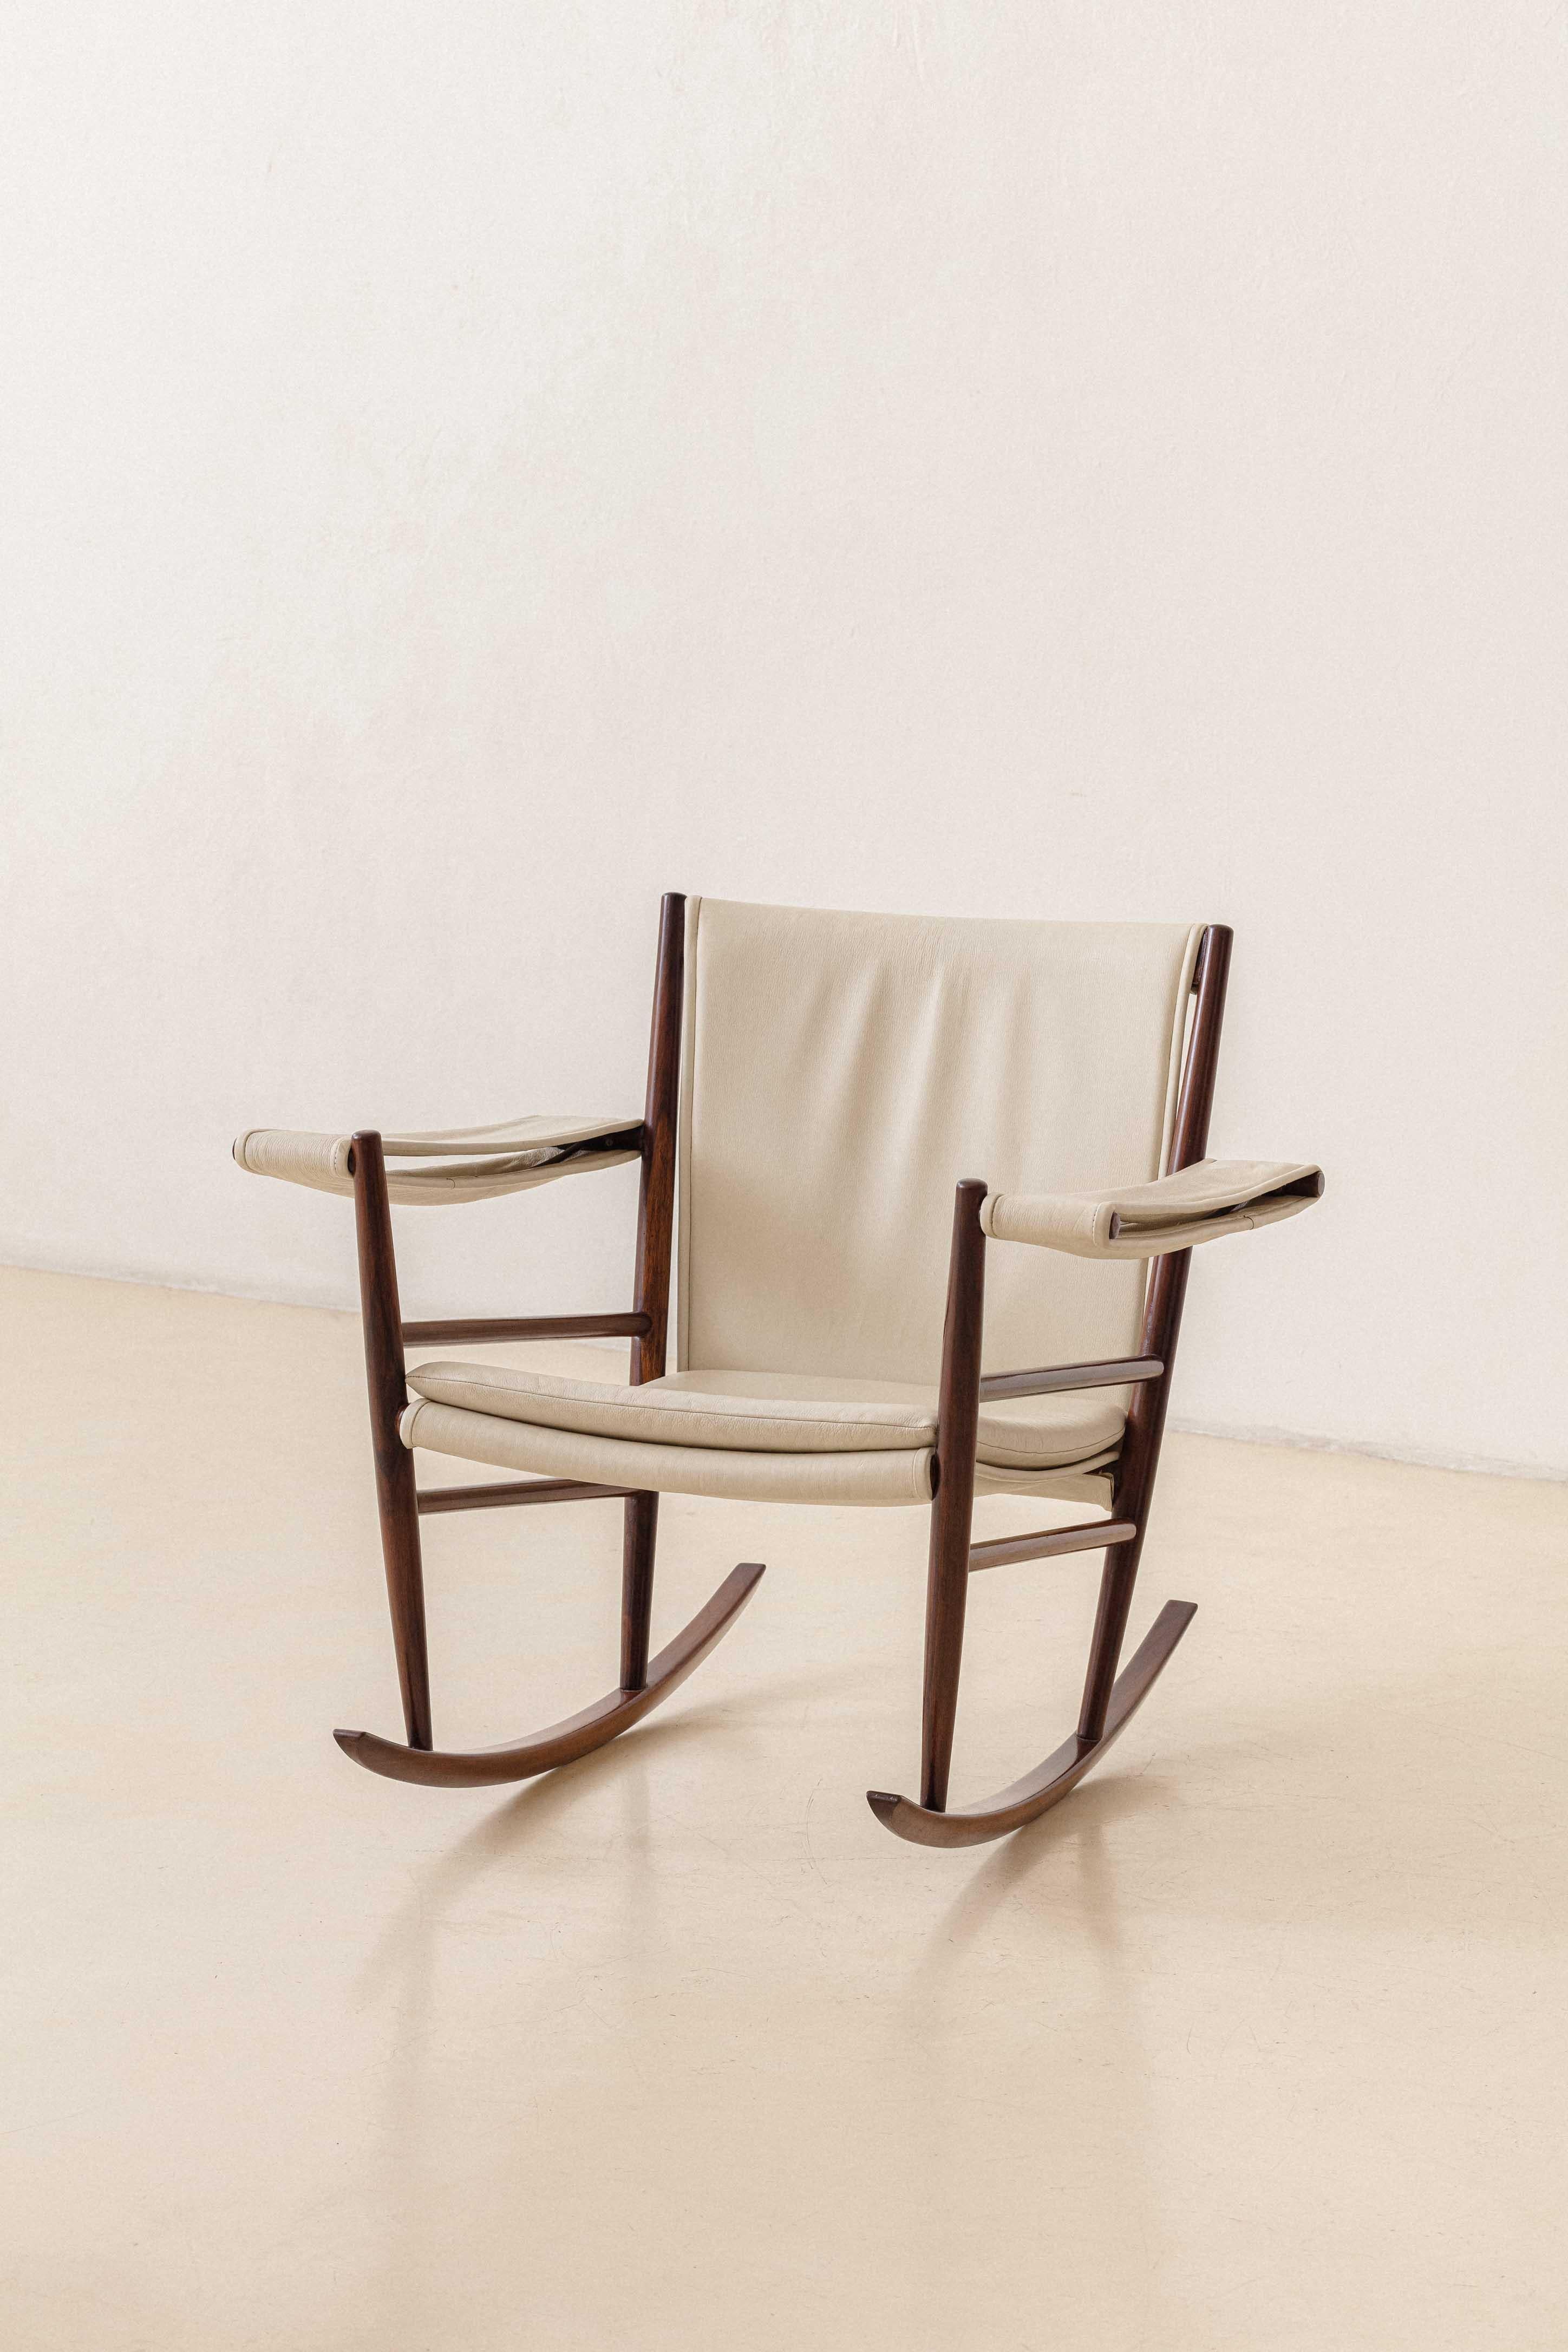 This rocking chair was one of the first pieces produced by Joaquim Tenreiro (1906-1992) when his Langenbach & Tenreiro store opened in 1947.

Far beyond a designer and artist, Tenreiro was an intellectual and thinker of the Brazilian